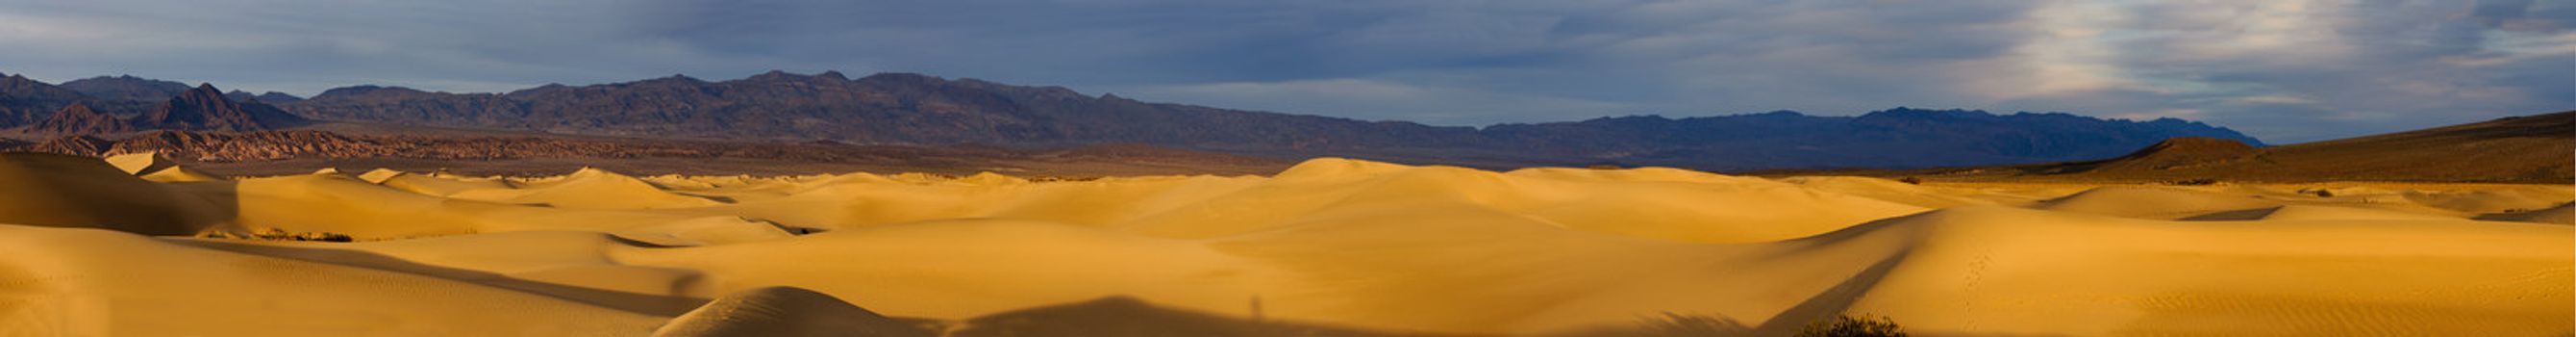 Panorama of the Mesquite Dunes area in Death valley